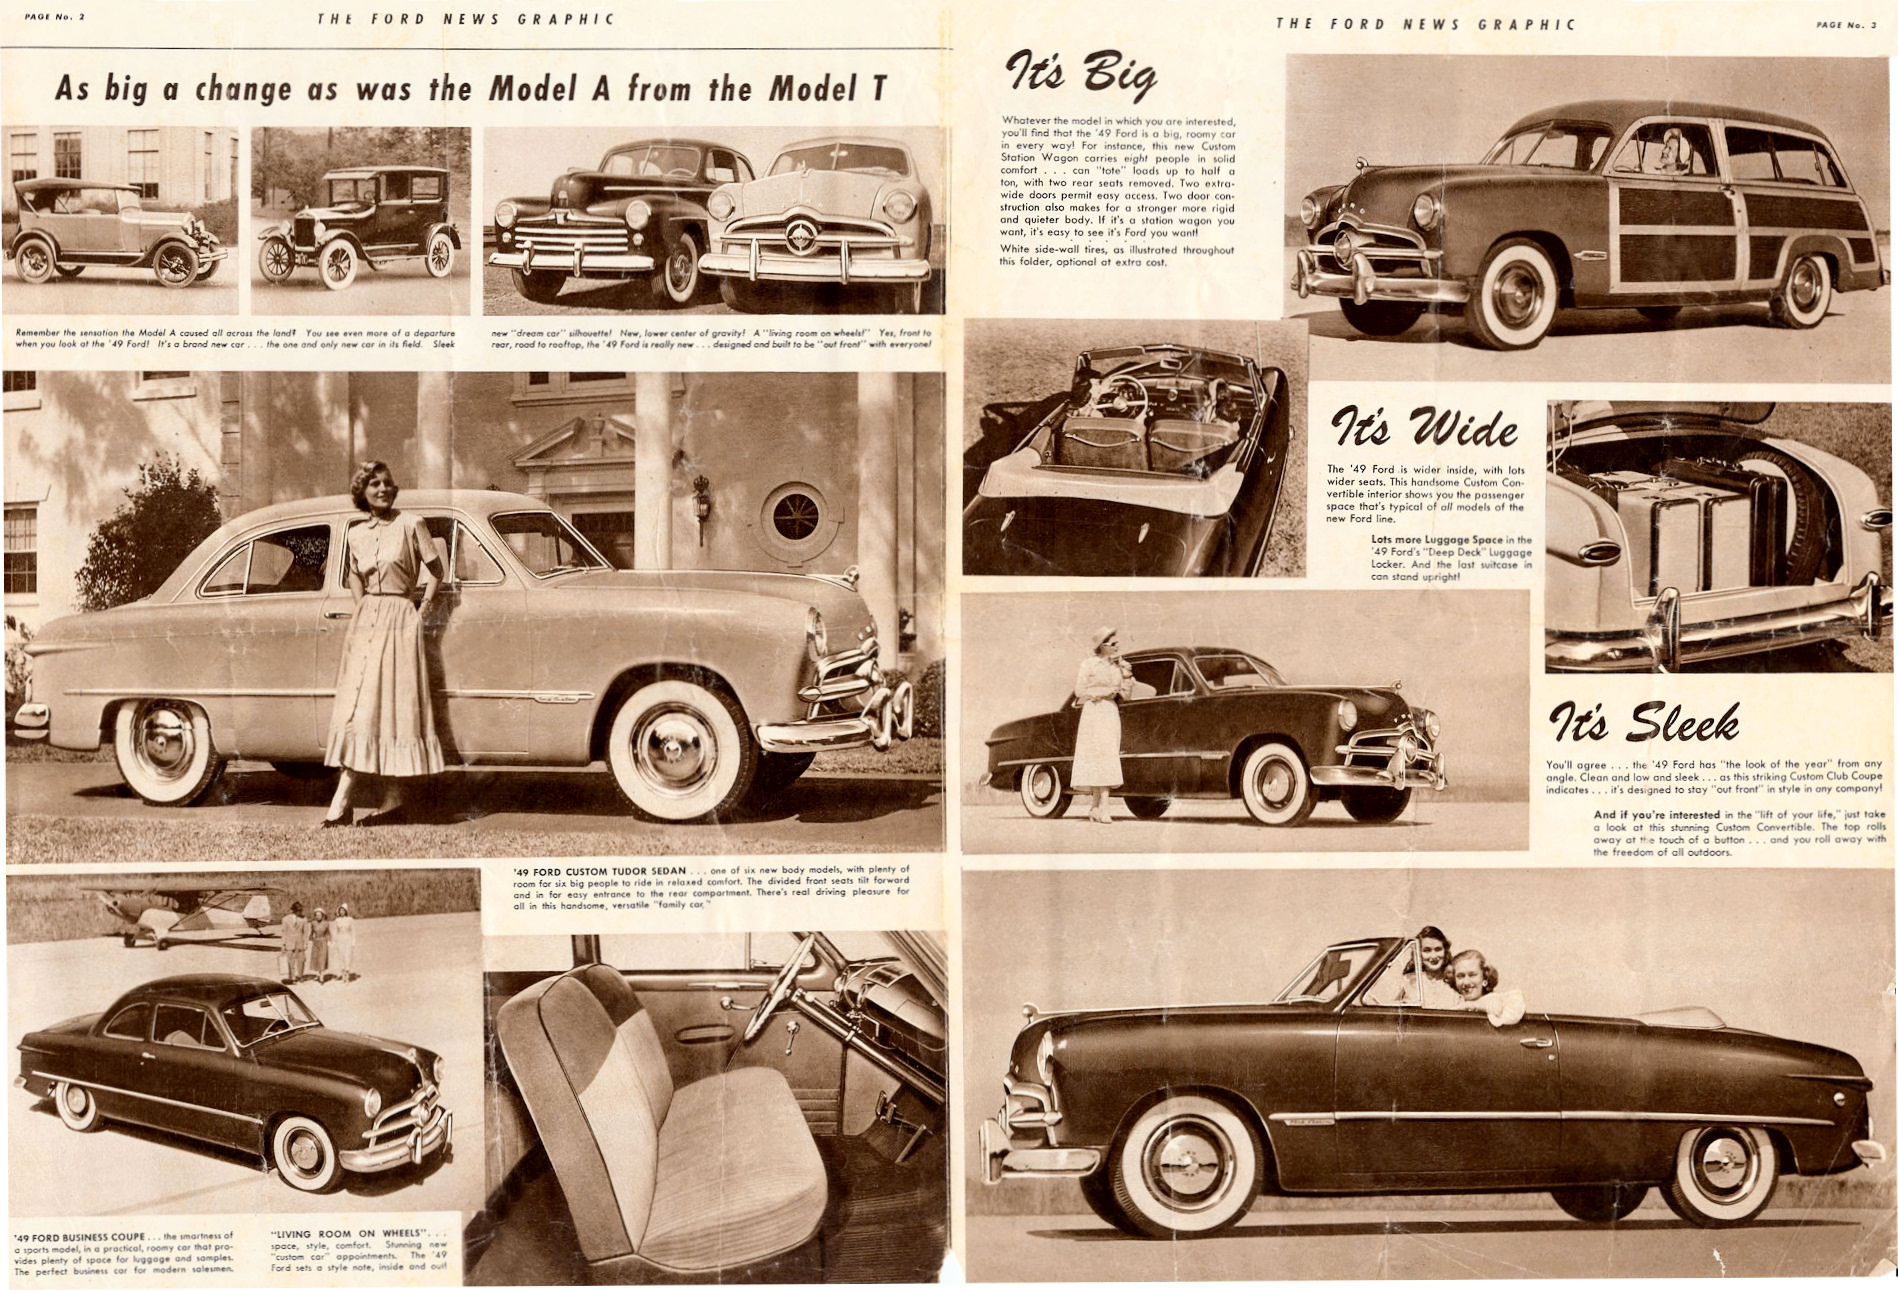 1949_Ford_News_Graphic_Foldout-02-03